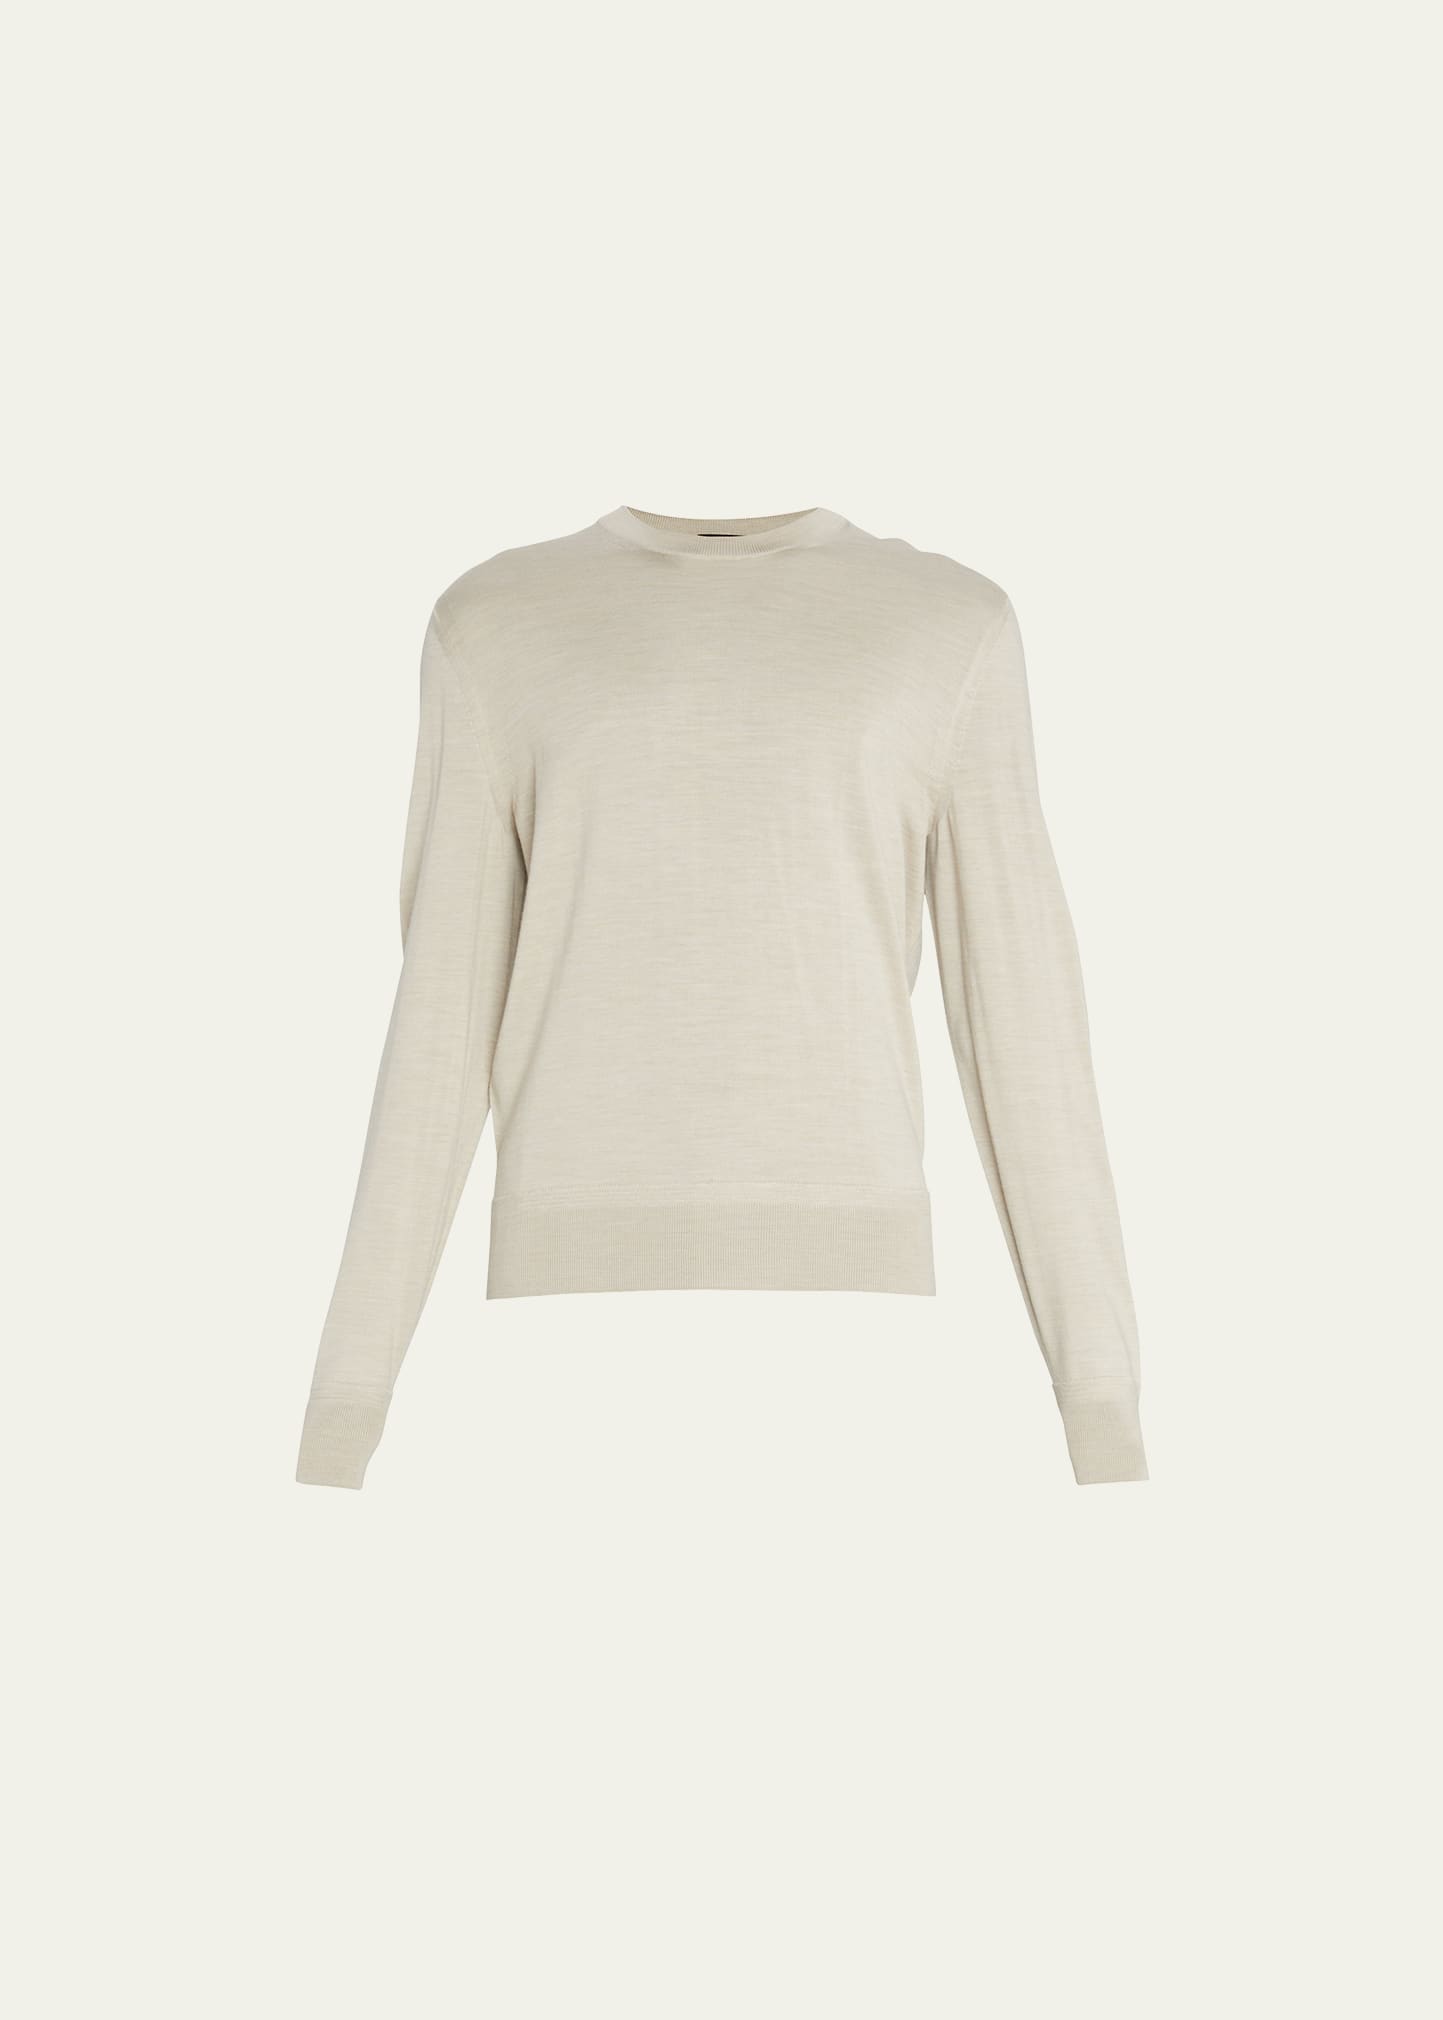 Tom Ford Men's Wool Knit Crewneck Sweater In Light Beige Solid